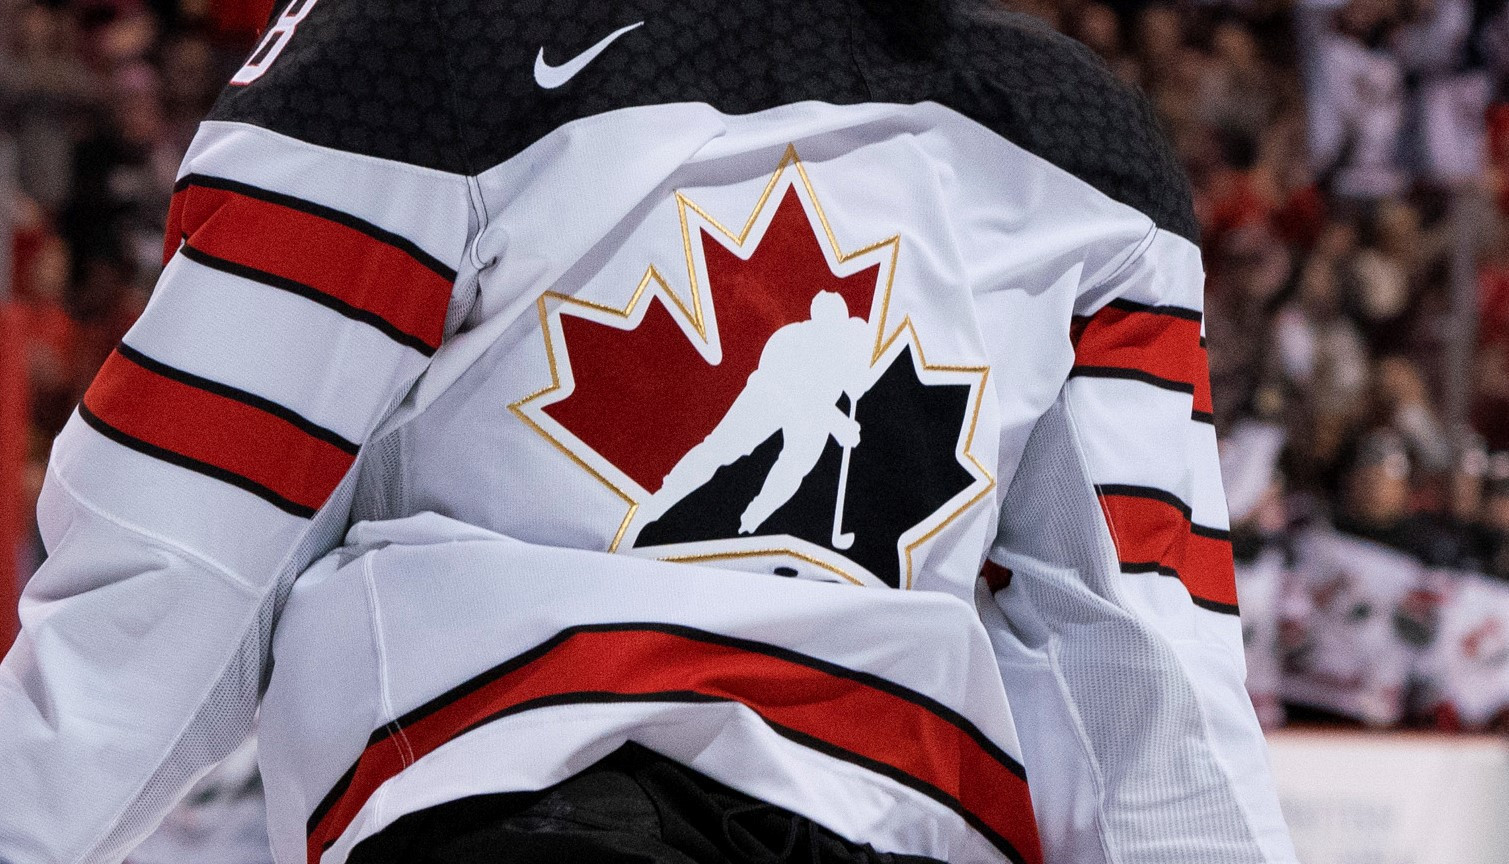 Hockey Canada's access to public funds has been frozen amid backlash over its handling of claims of sexual assault ©Getty Images